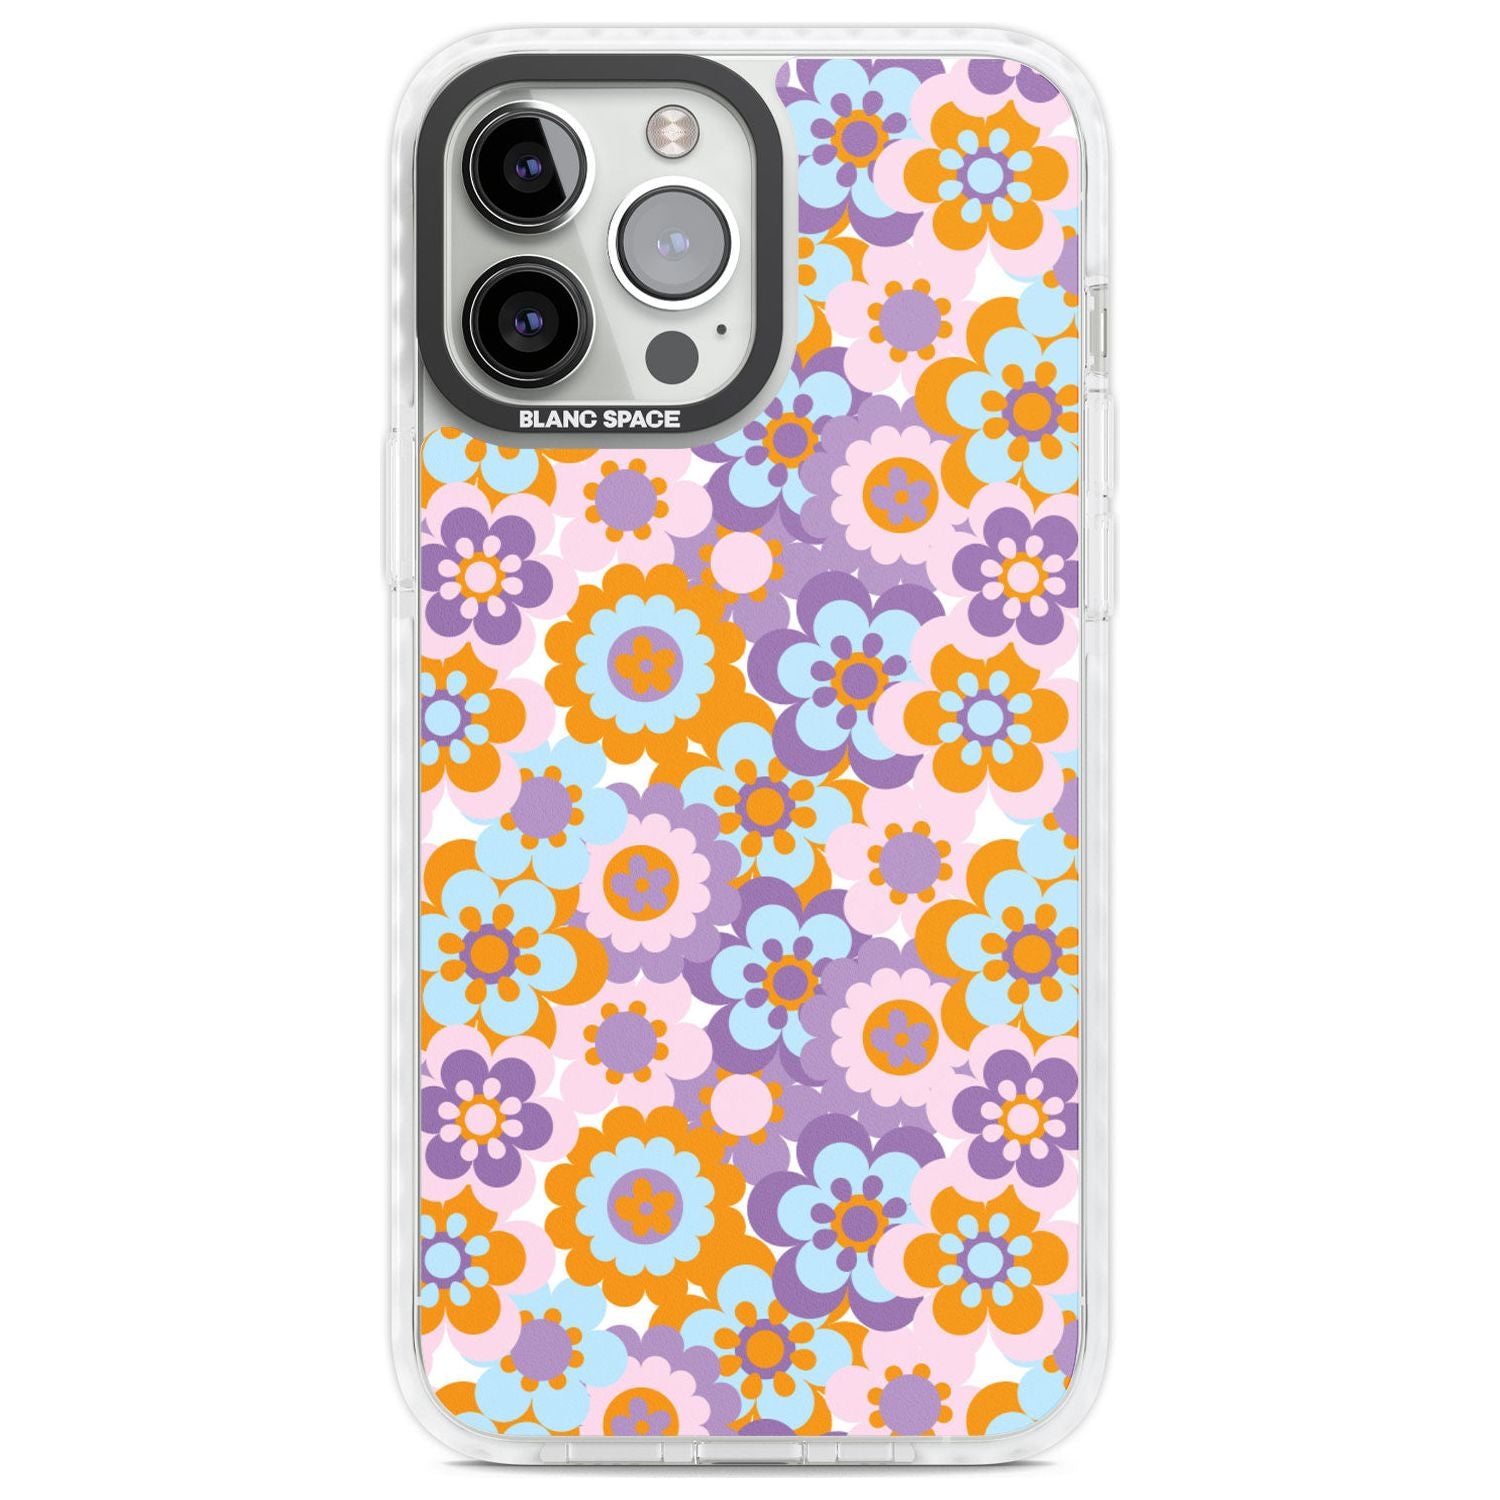 Flower Power Pattern Phone Case iPhone 13 Pro Max / Impact Case,iPhone 14 Pro Max / Impact Case Blanc Space